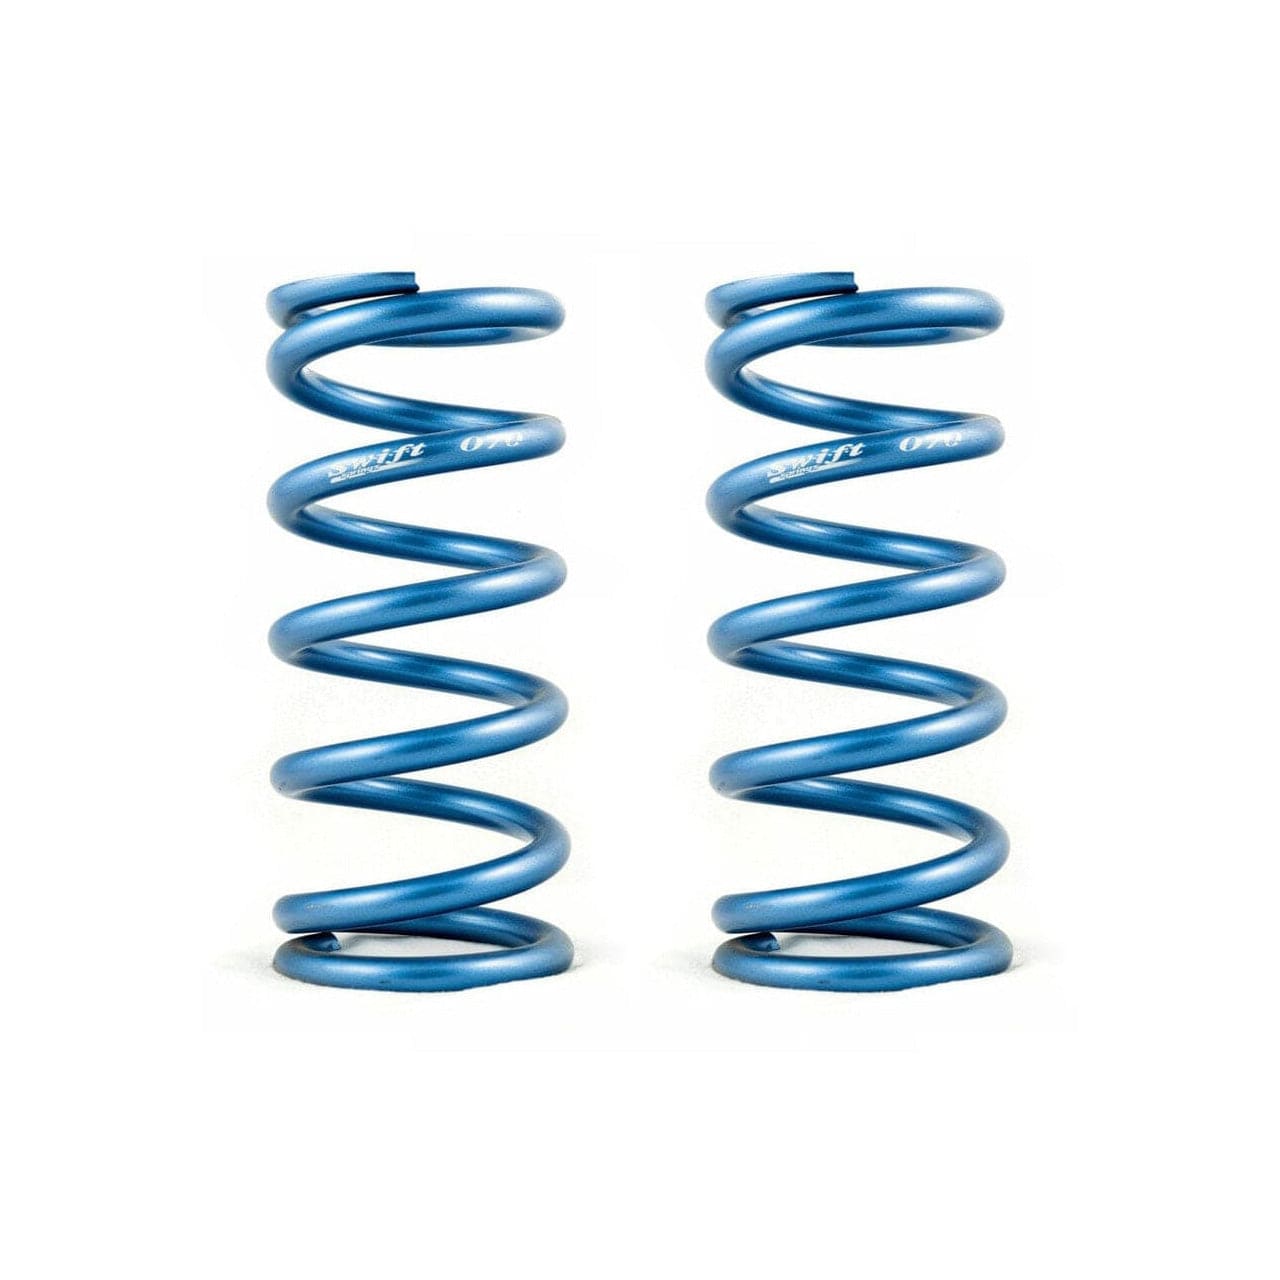 Swift Springs Metric Coilover Springs - ID 60mm, 6" Length